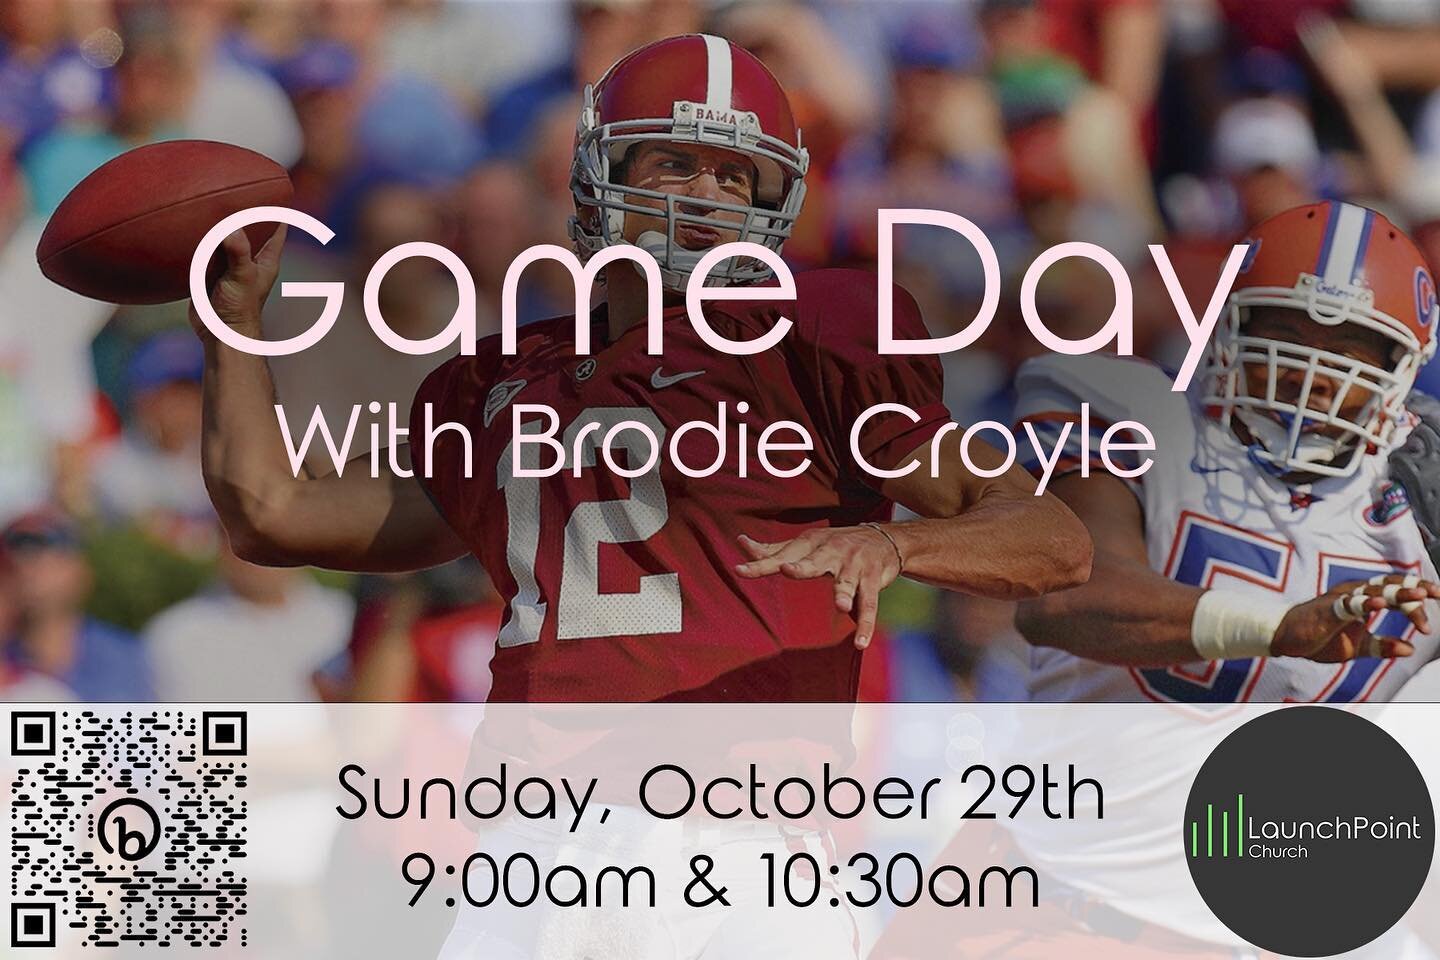 From Rainbow City, Alabama, former Alabama Crimson Tide and Kansas City Chiefs quarterback, Brodie Croyle, shares his story. Croyle will be speaking during our 9:00am &amp; 10:30am services. Invite a friend and hope to see you there!